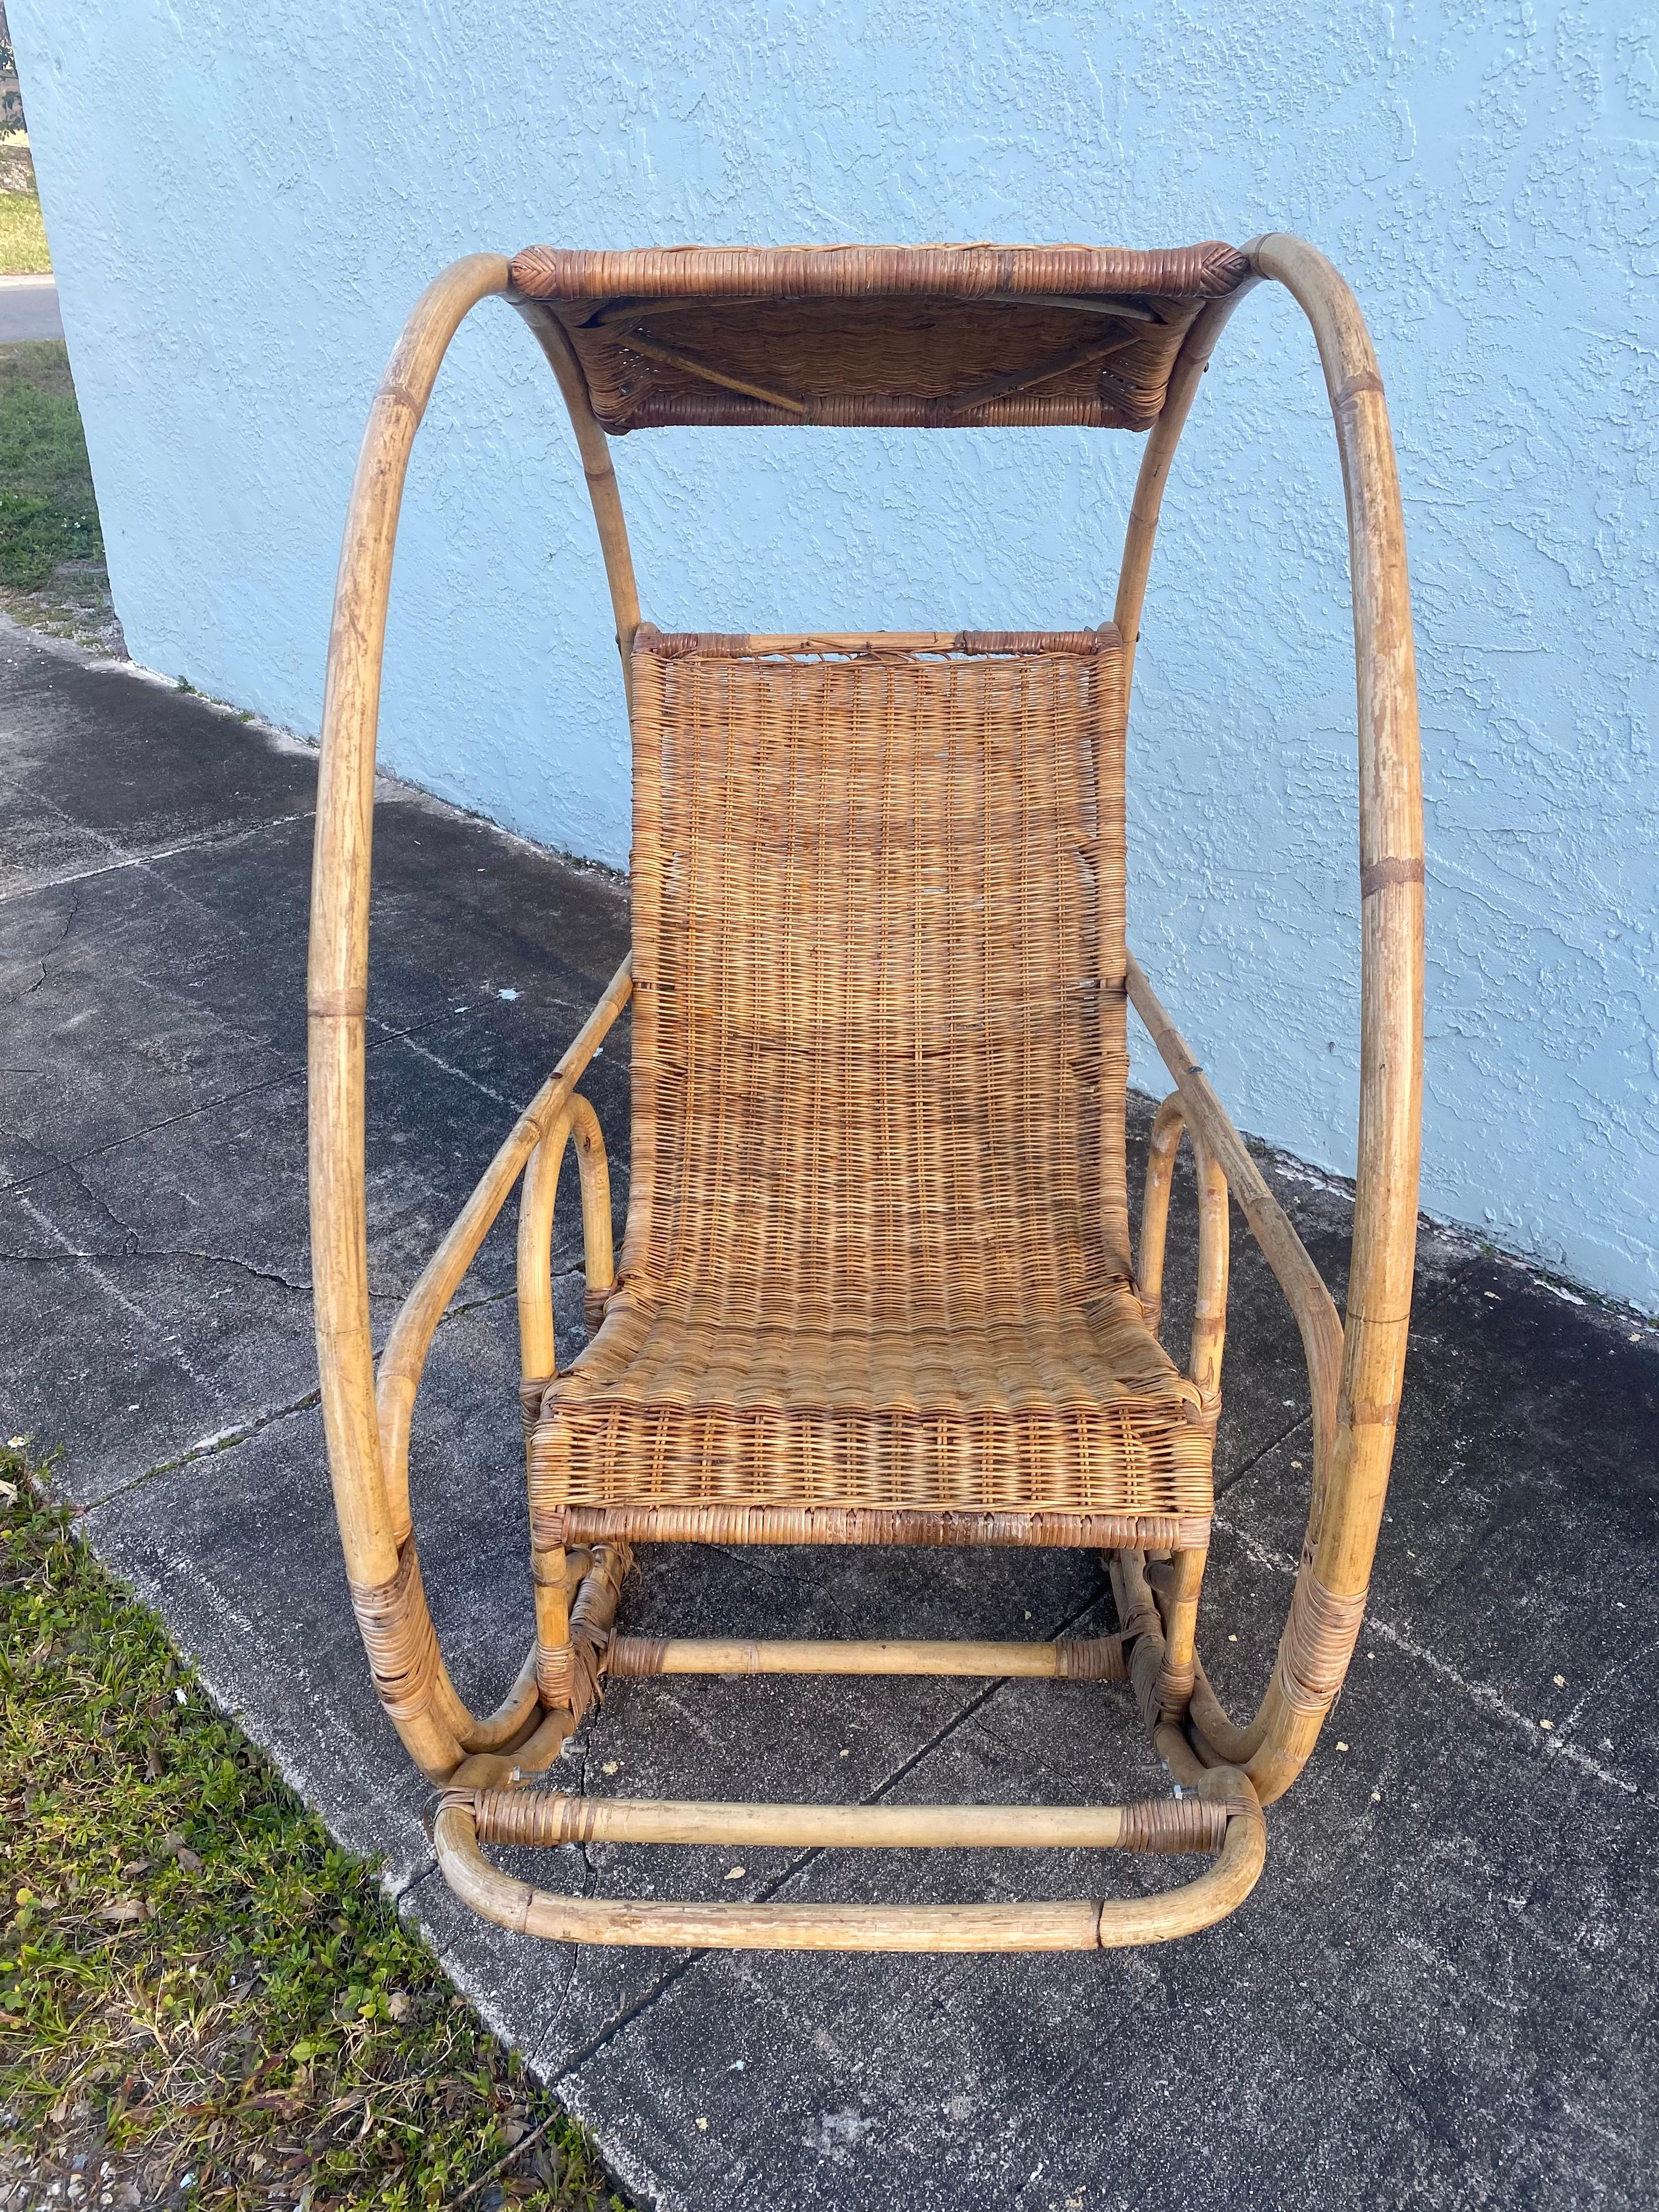 1960s Rattan Wicker Sculptural Round Rocking Chair In Good Condition For Sale In Fort Lauderdale, FL